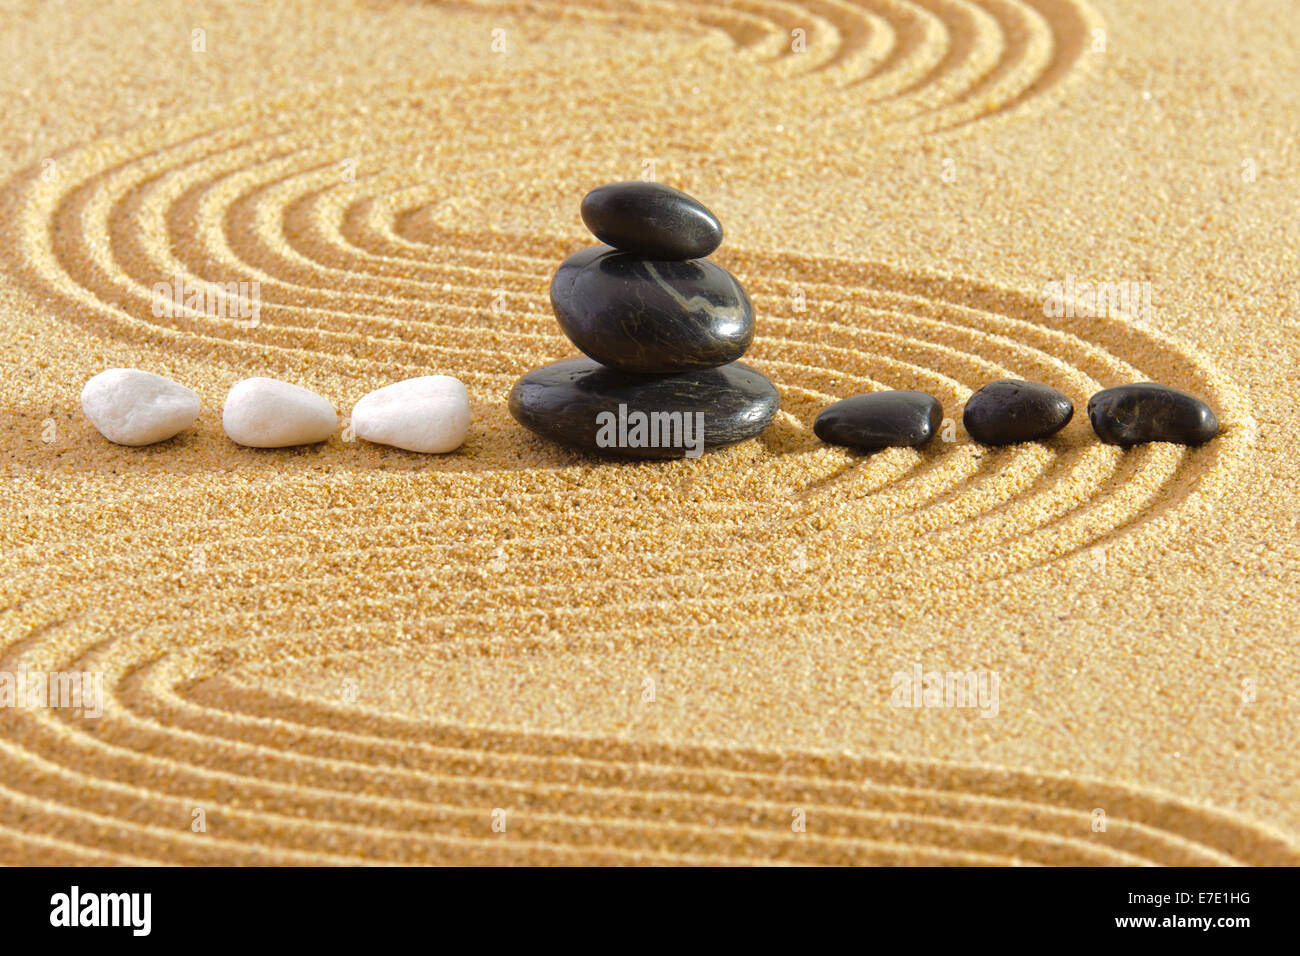 Japanese garden with rocks in sand and yin and yang Stock Photo